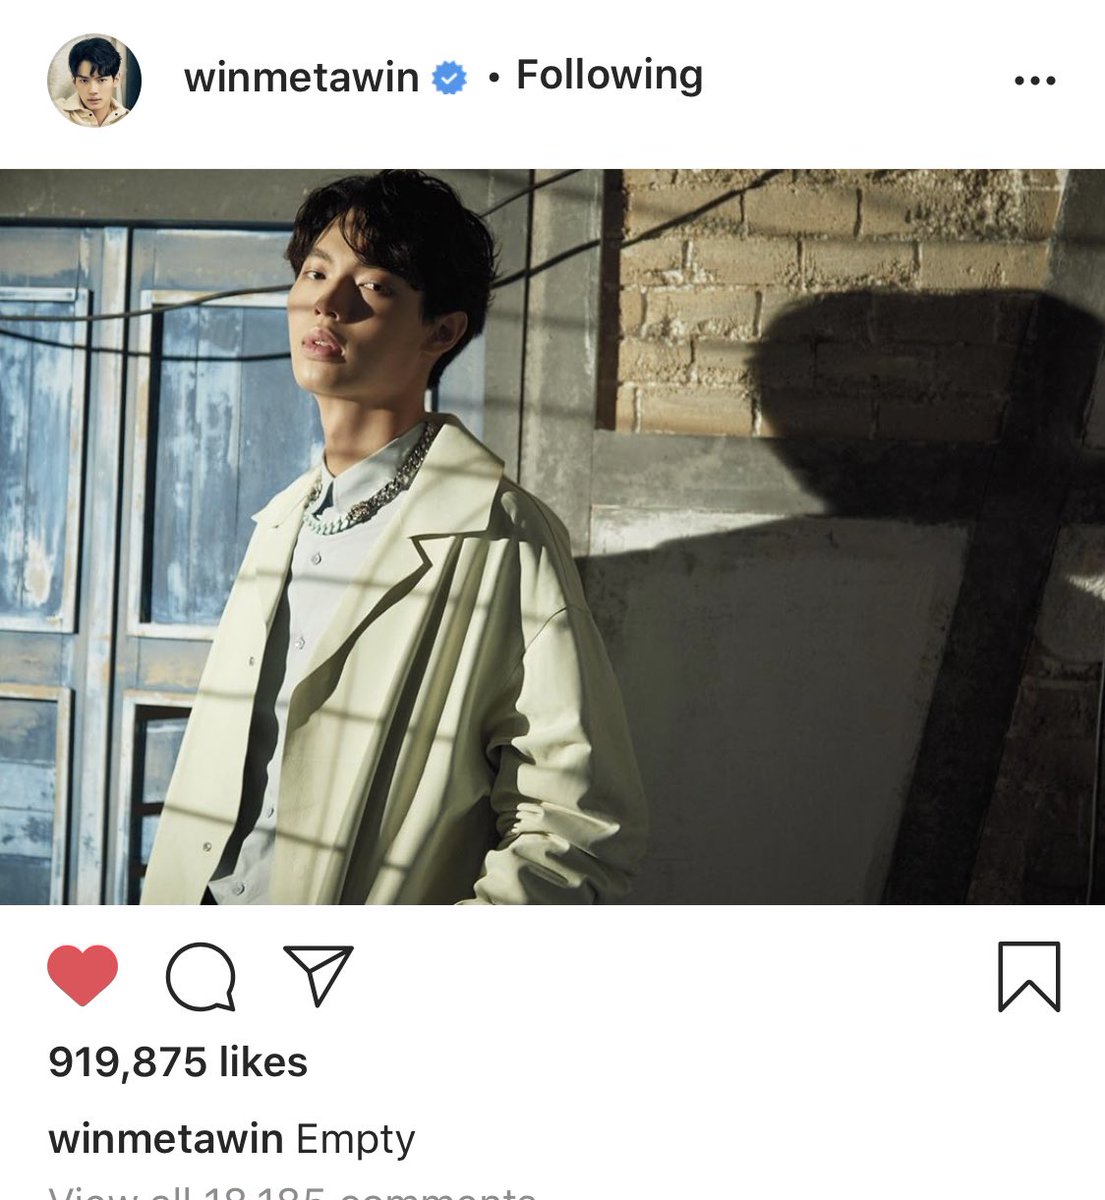 Win Metawin’s IG post with +900k loves  Part-1Pls go and love these na kha https://www.instagram.com/p/CAZODr0n3W_/?utm_source=ig_web_copy_link  https://www.instagram.com/p/CAIwNjBHzjt/?utm_source=ig_web_copy_link https://www.instagram.com/p/B_17qJYn9Z0/?utm_source=ig_web_copy_link https://www.instagram.com/p/B_zMLvSnBkO/?utm_source=ig_web_copy_link  #winmetawin  #snowballpower